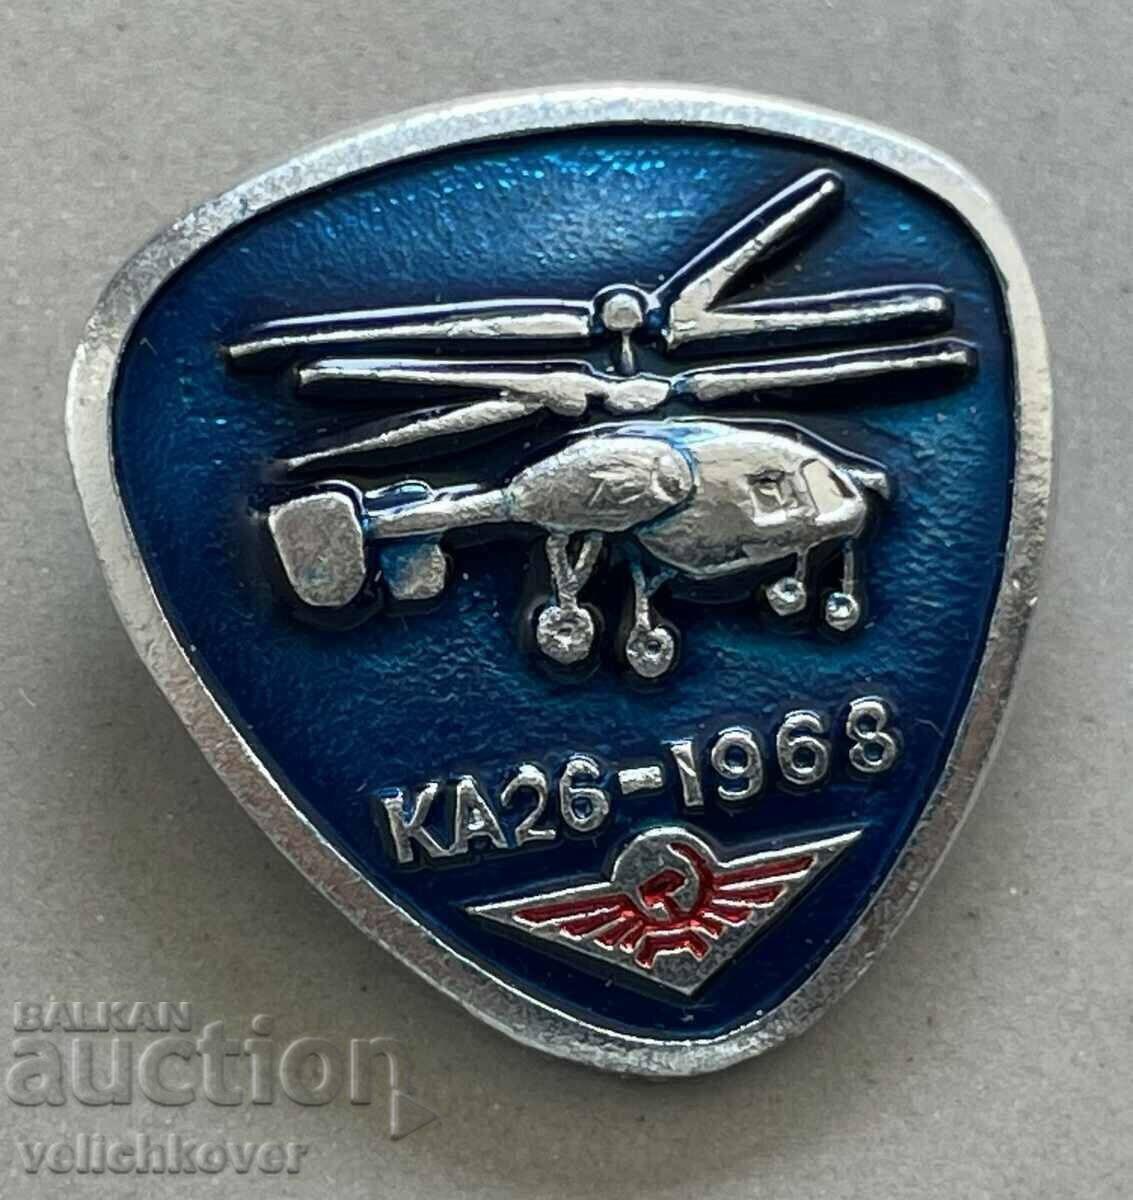 35370 USSR insignia helicopter model KA 26 1968.